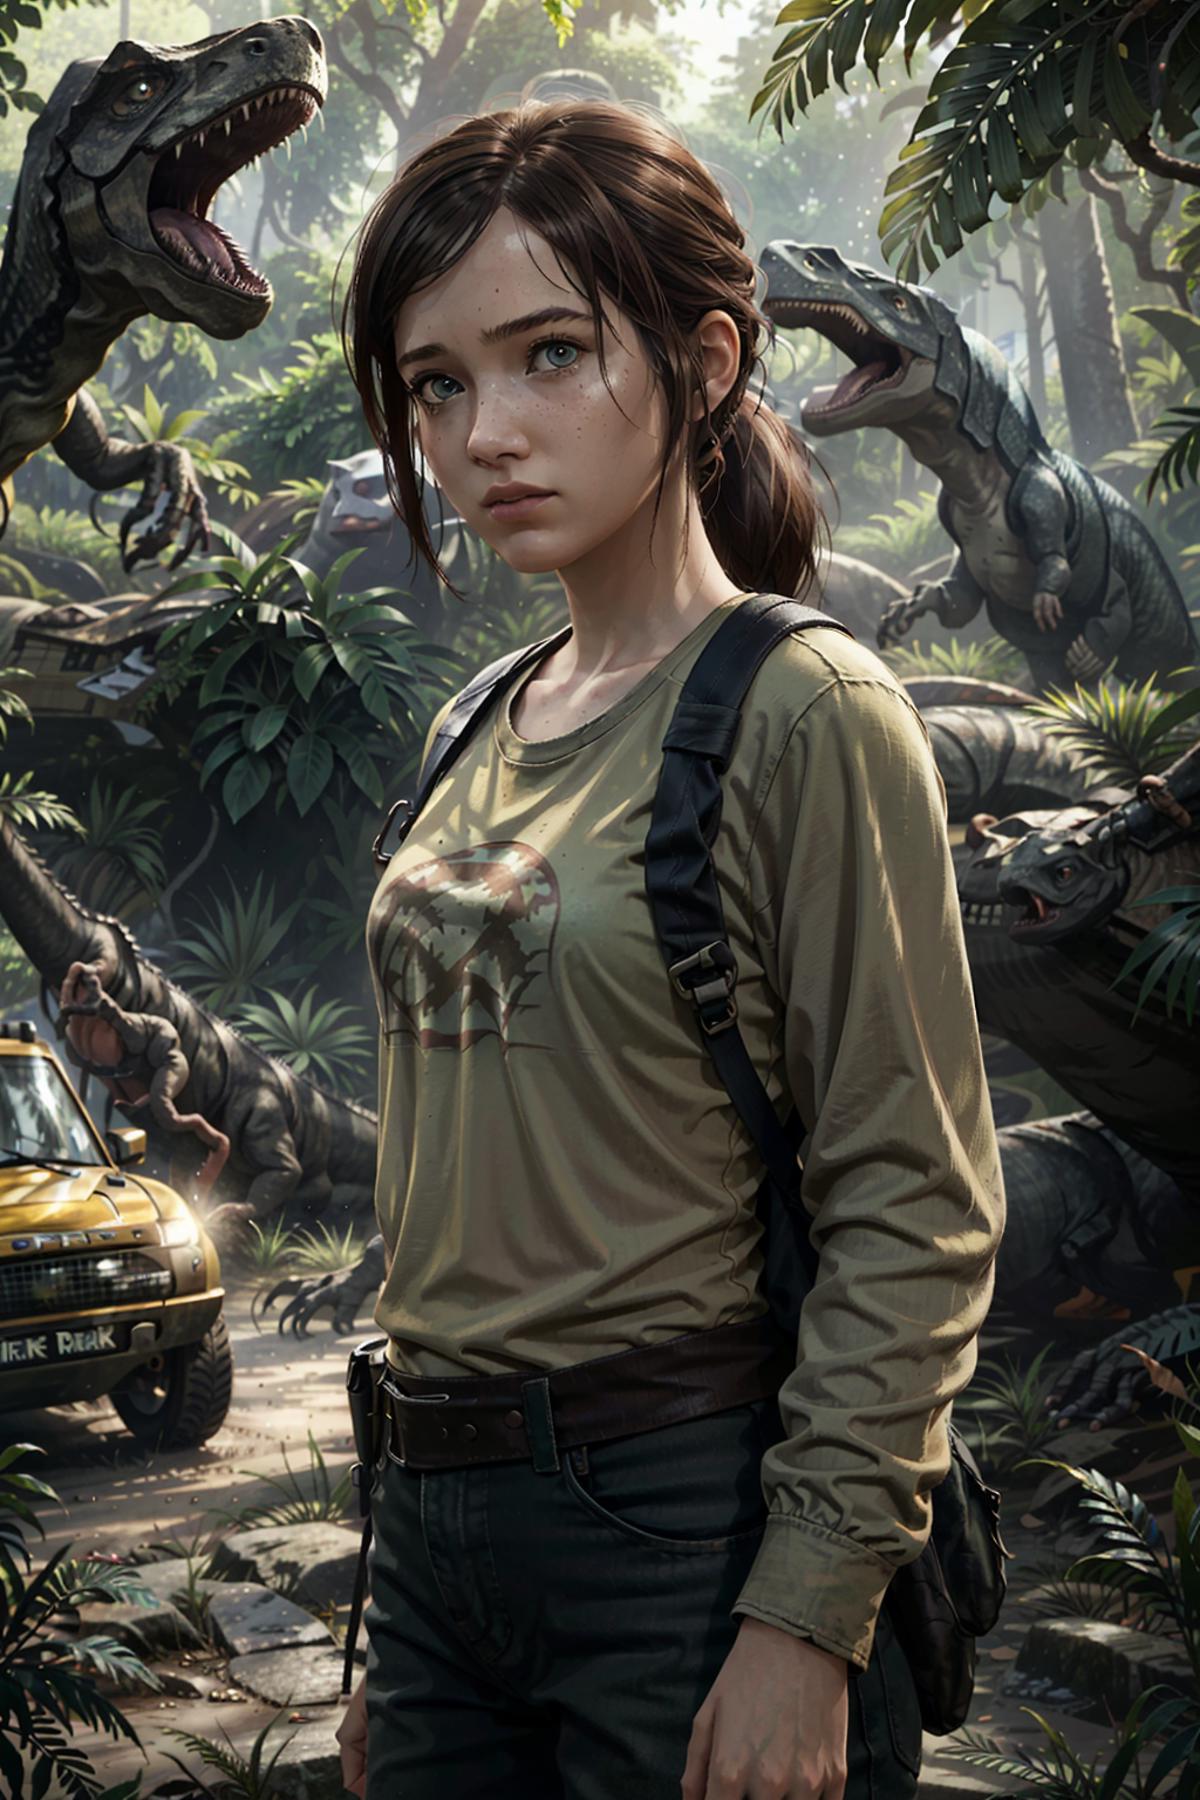 Ellie from The Last of Us image by Ellie_Williams